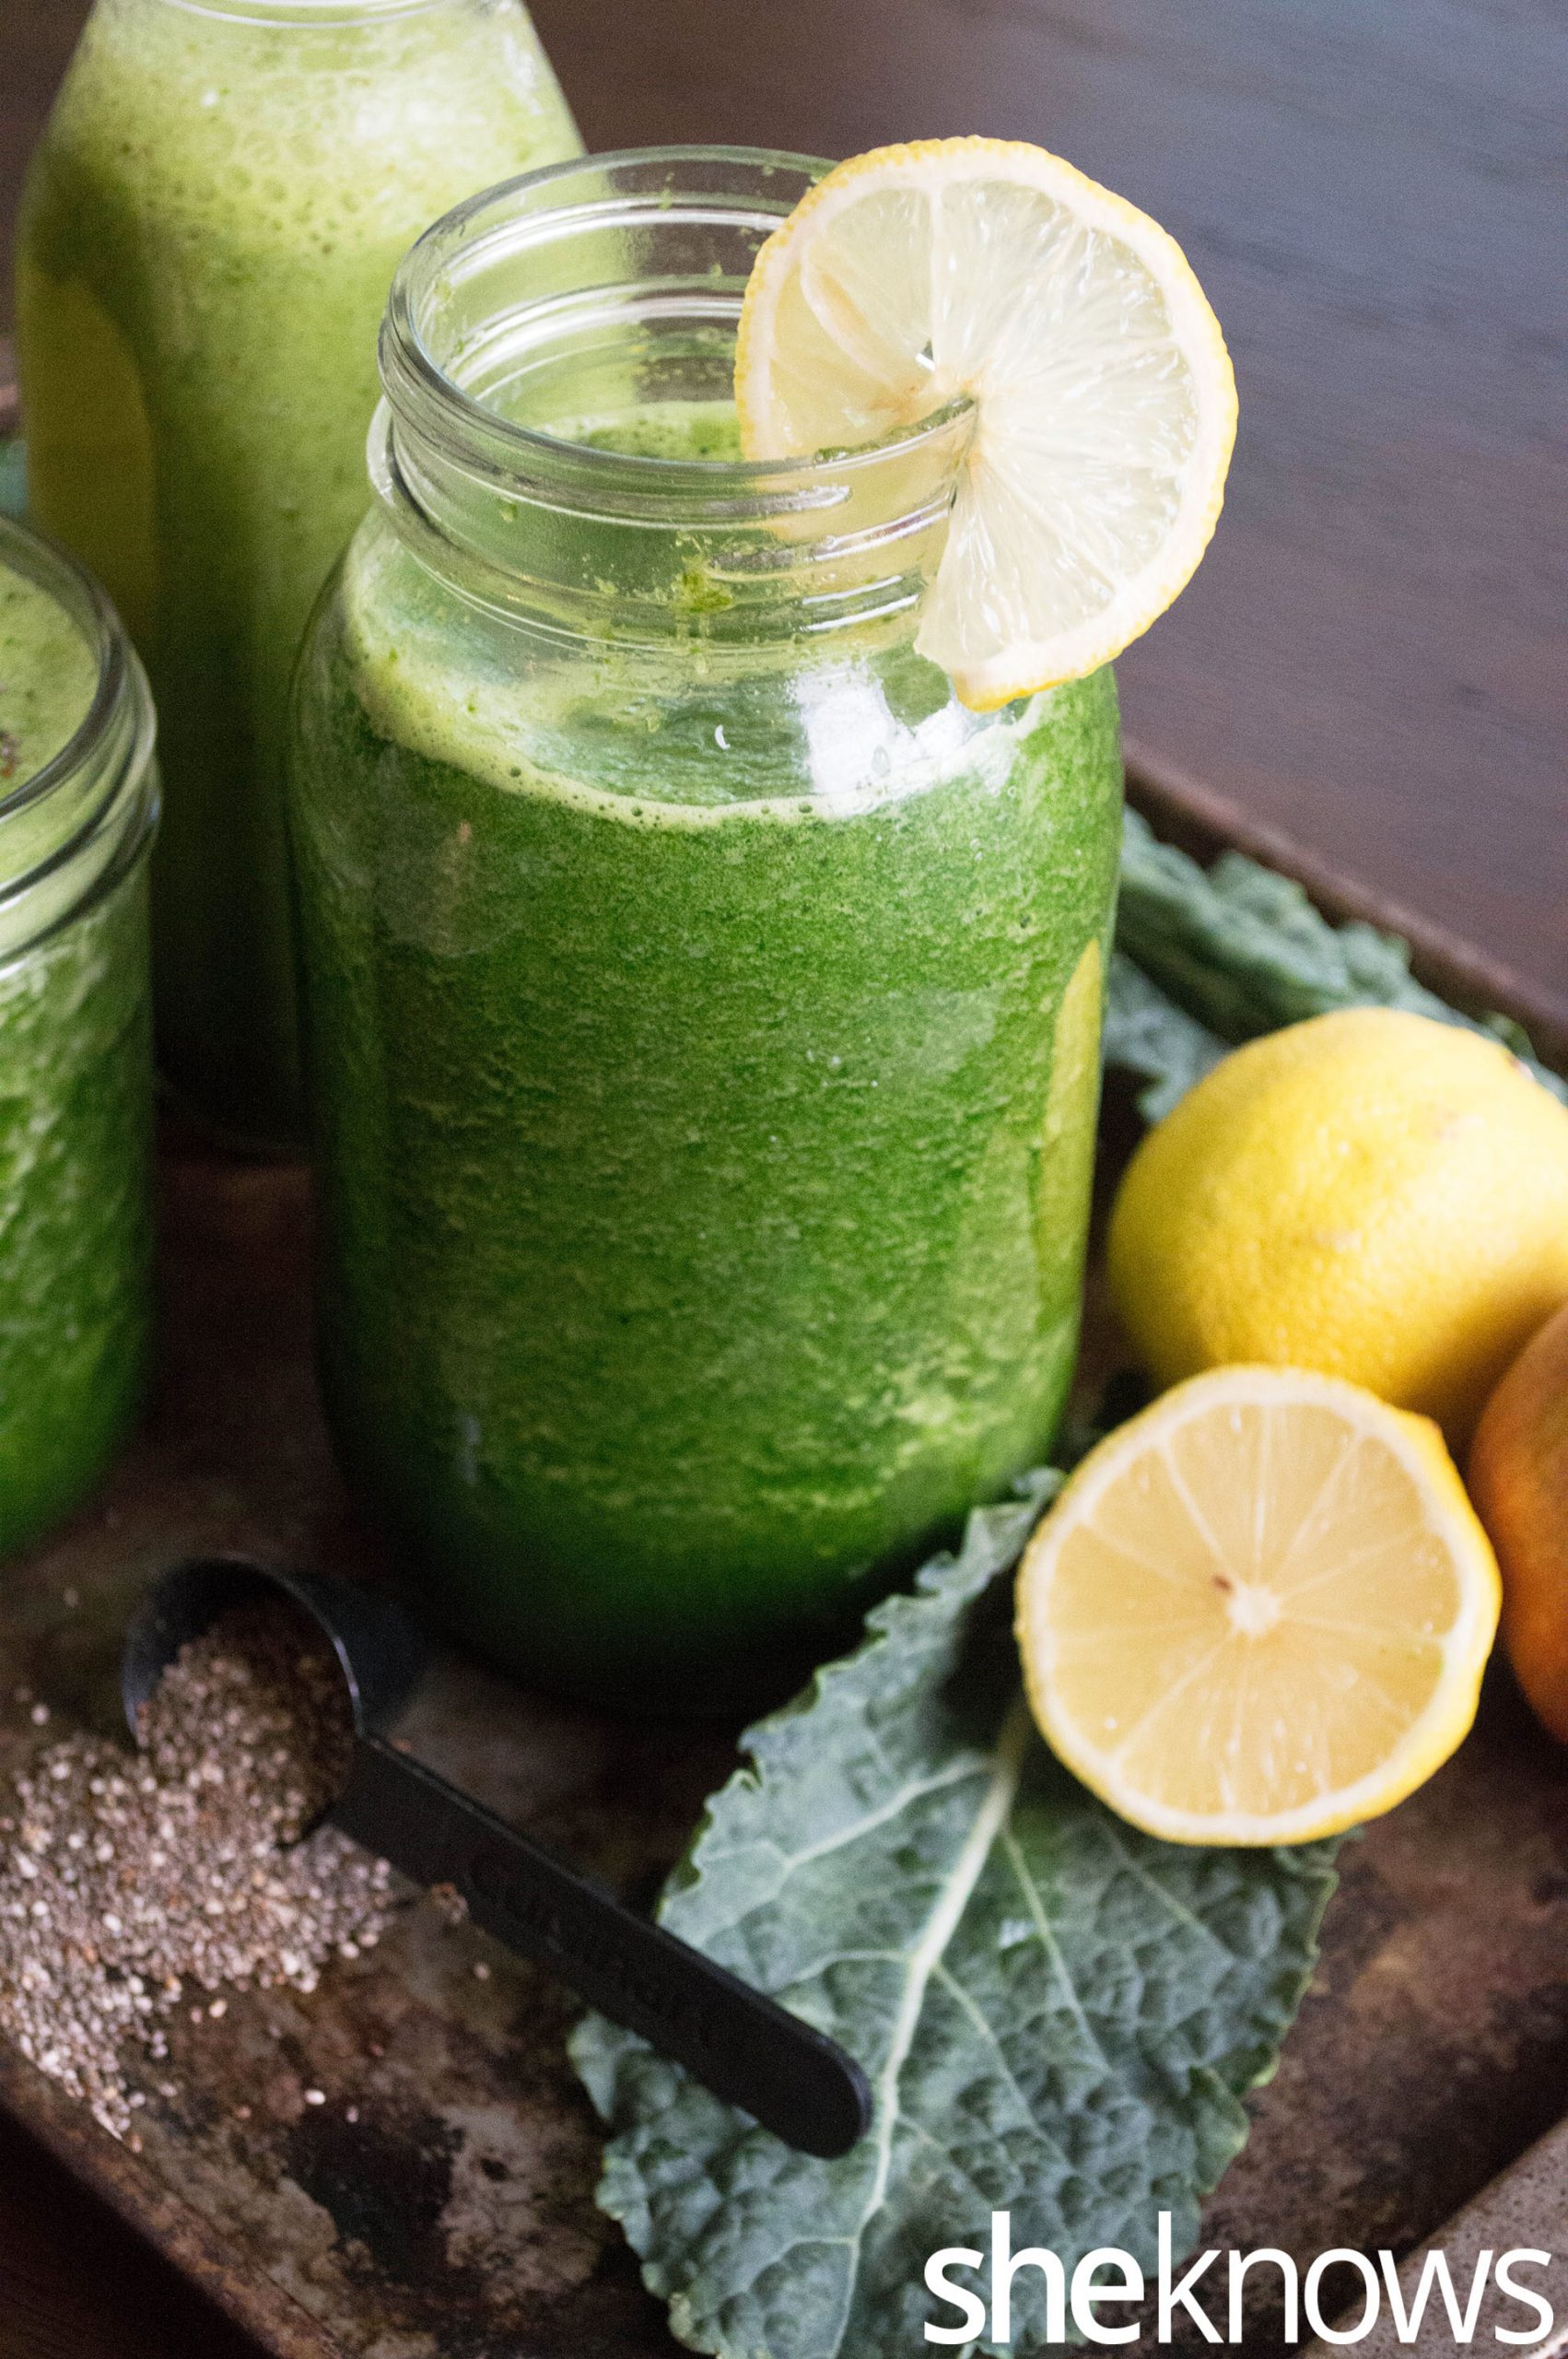 These Green Smoothie Recipes Have the Magical Power to ...